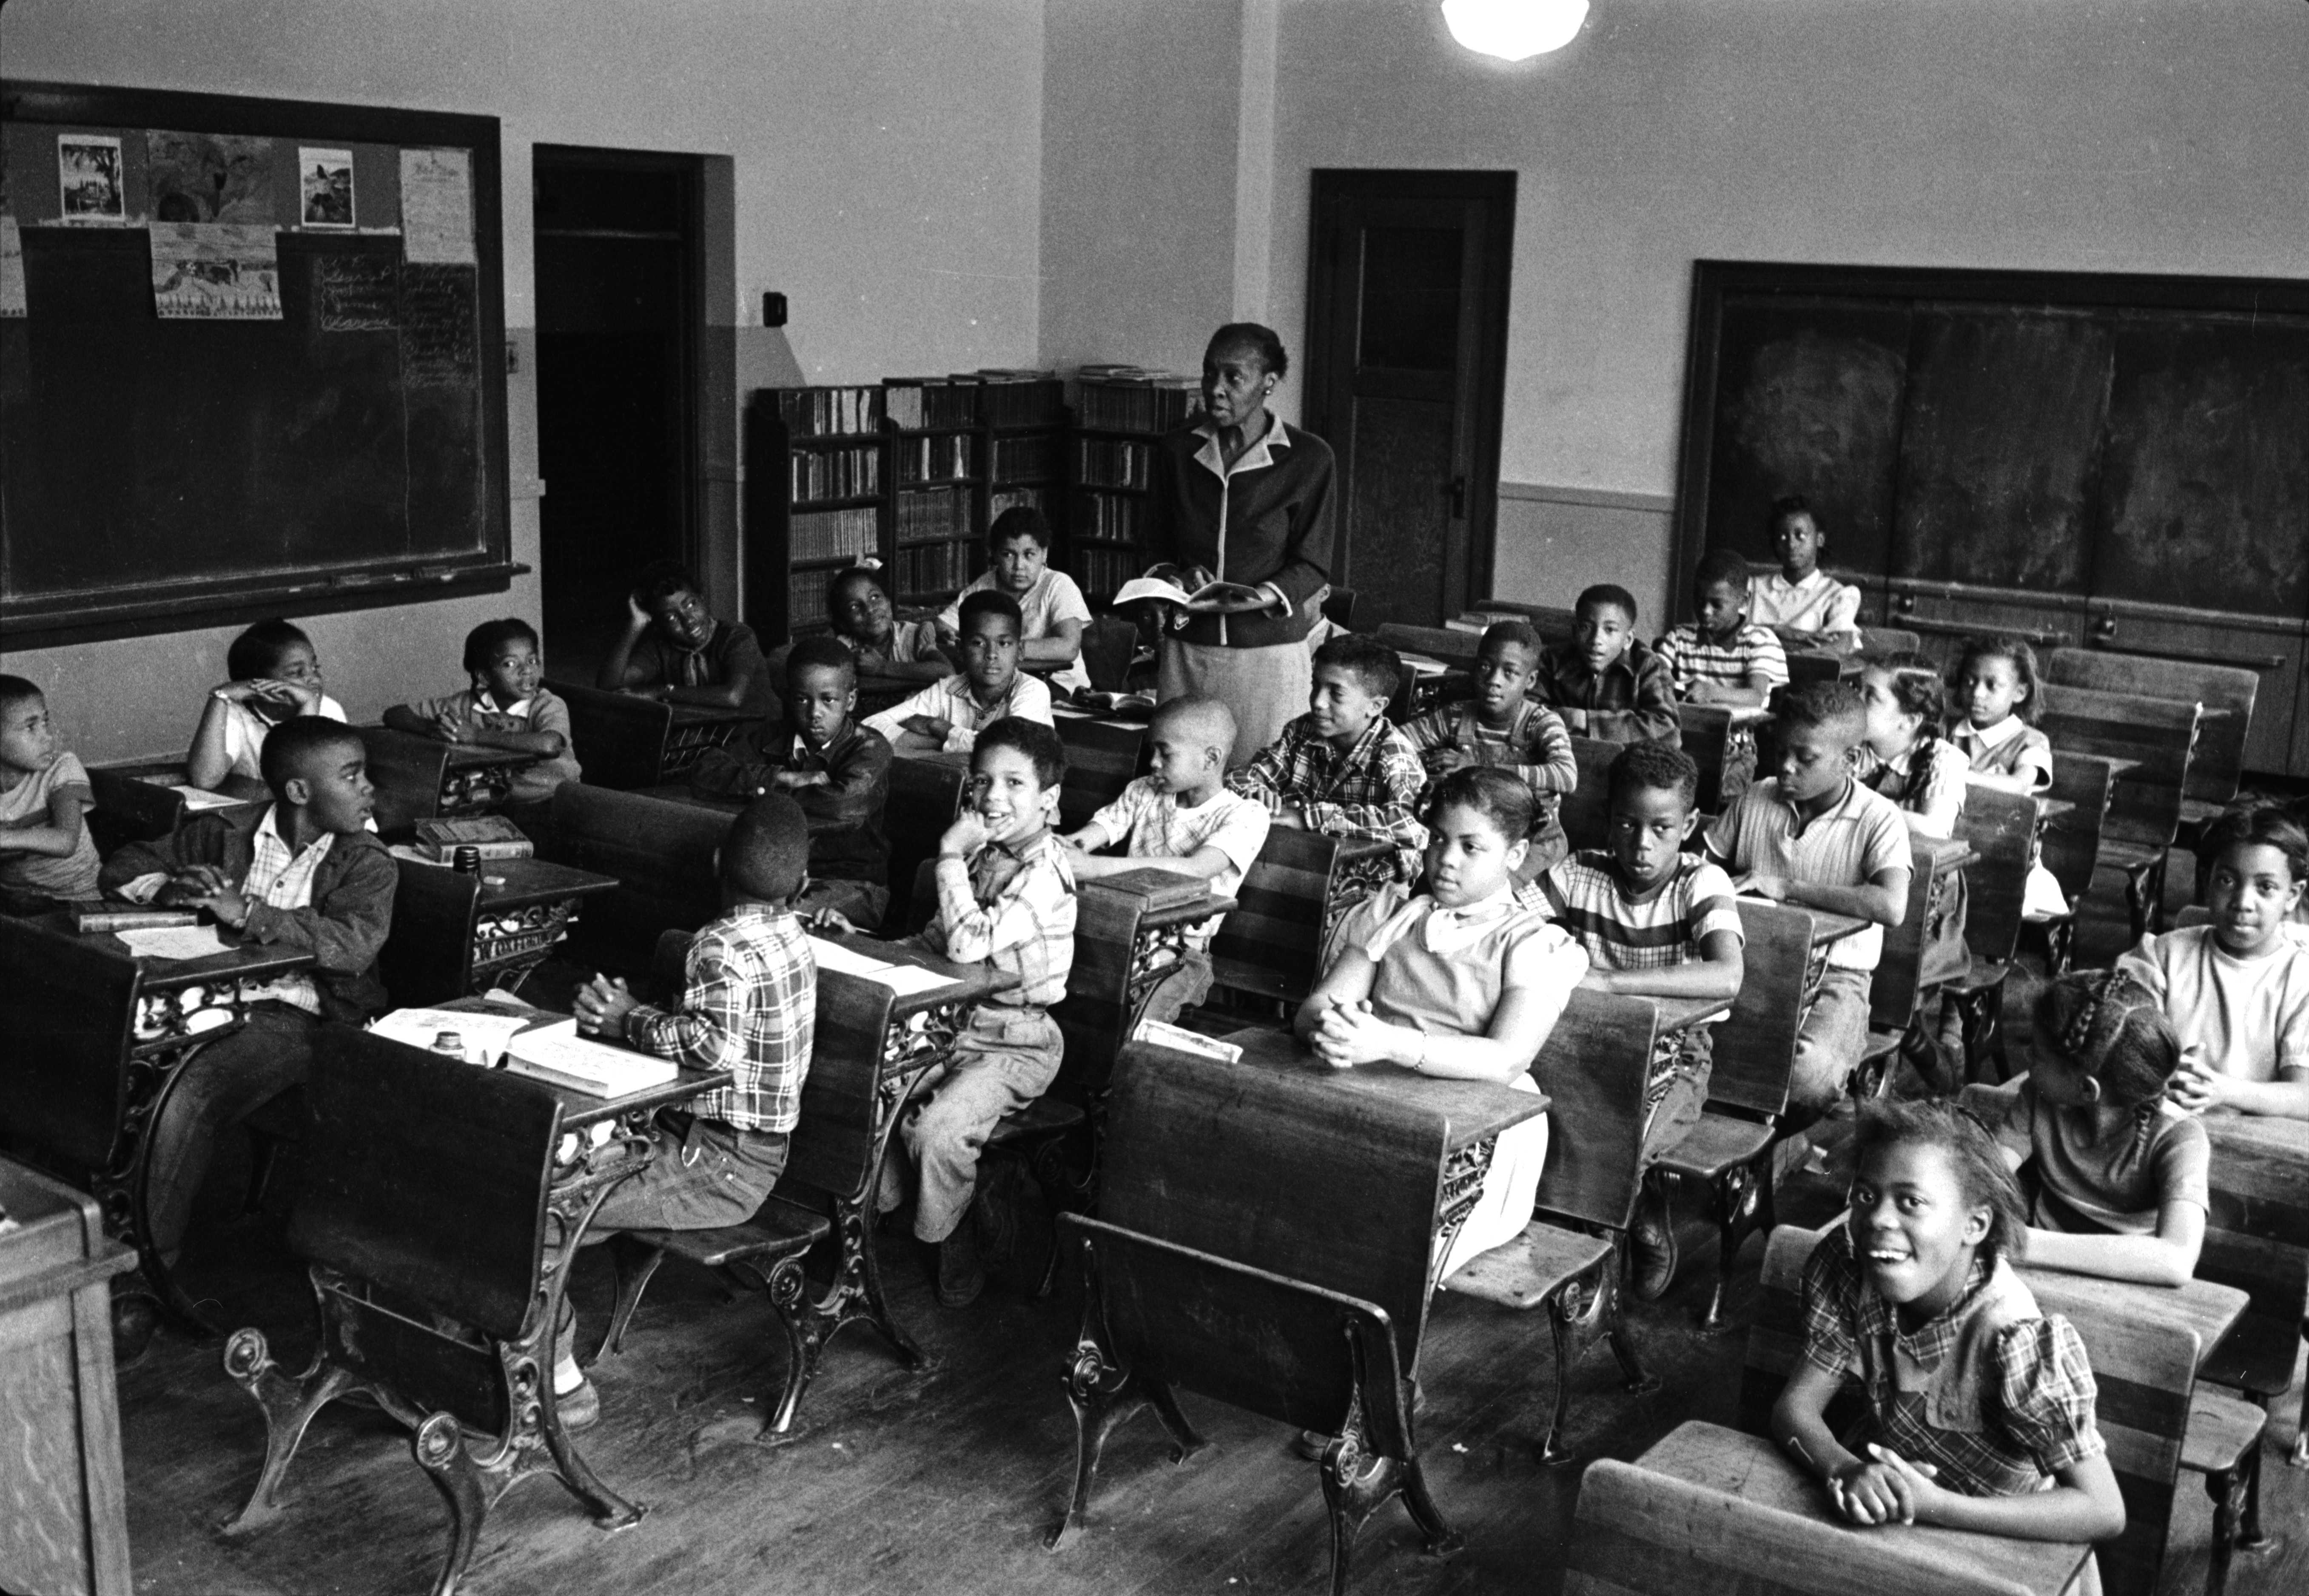 Black and white photograph of classroom with children seated at desks.  The teacher reads from a book while standing in the middle of all the desks.